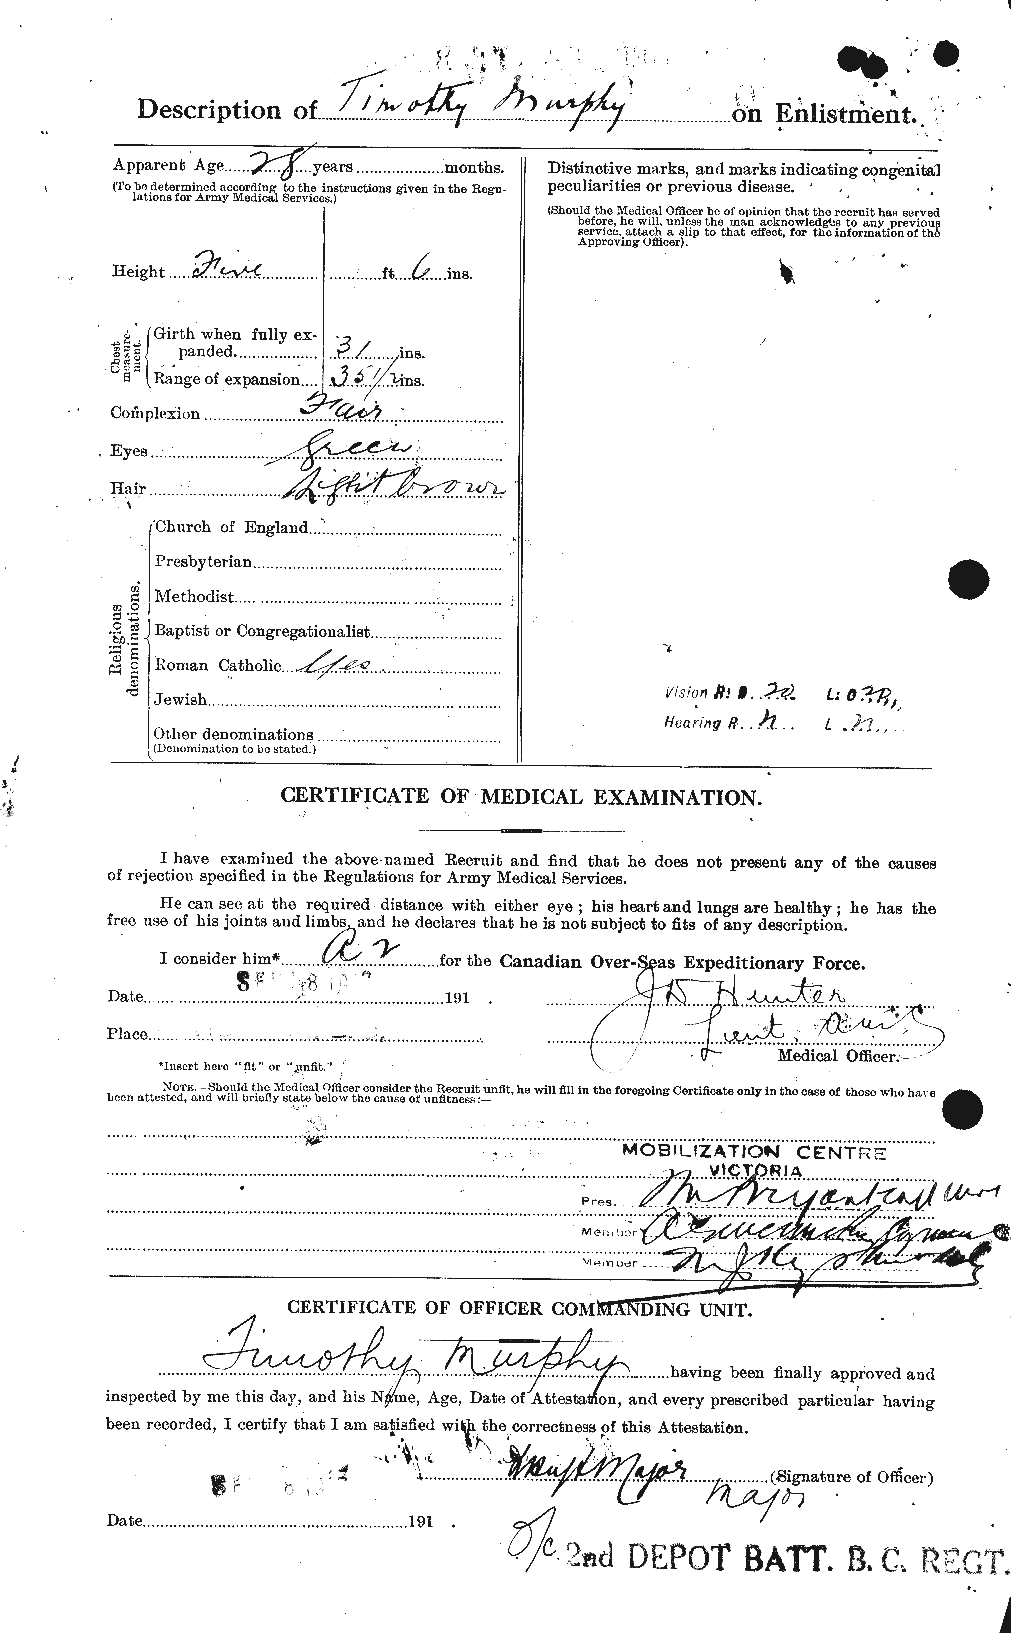 Personnel Records of the First World War - CEF 109559b